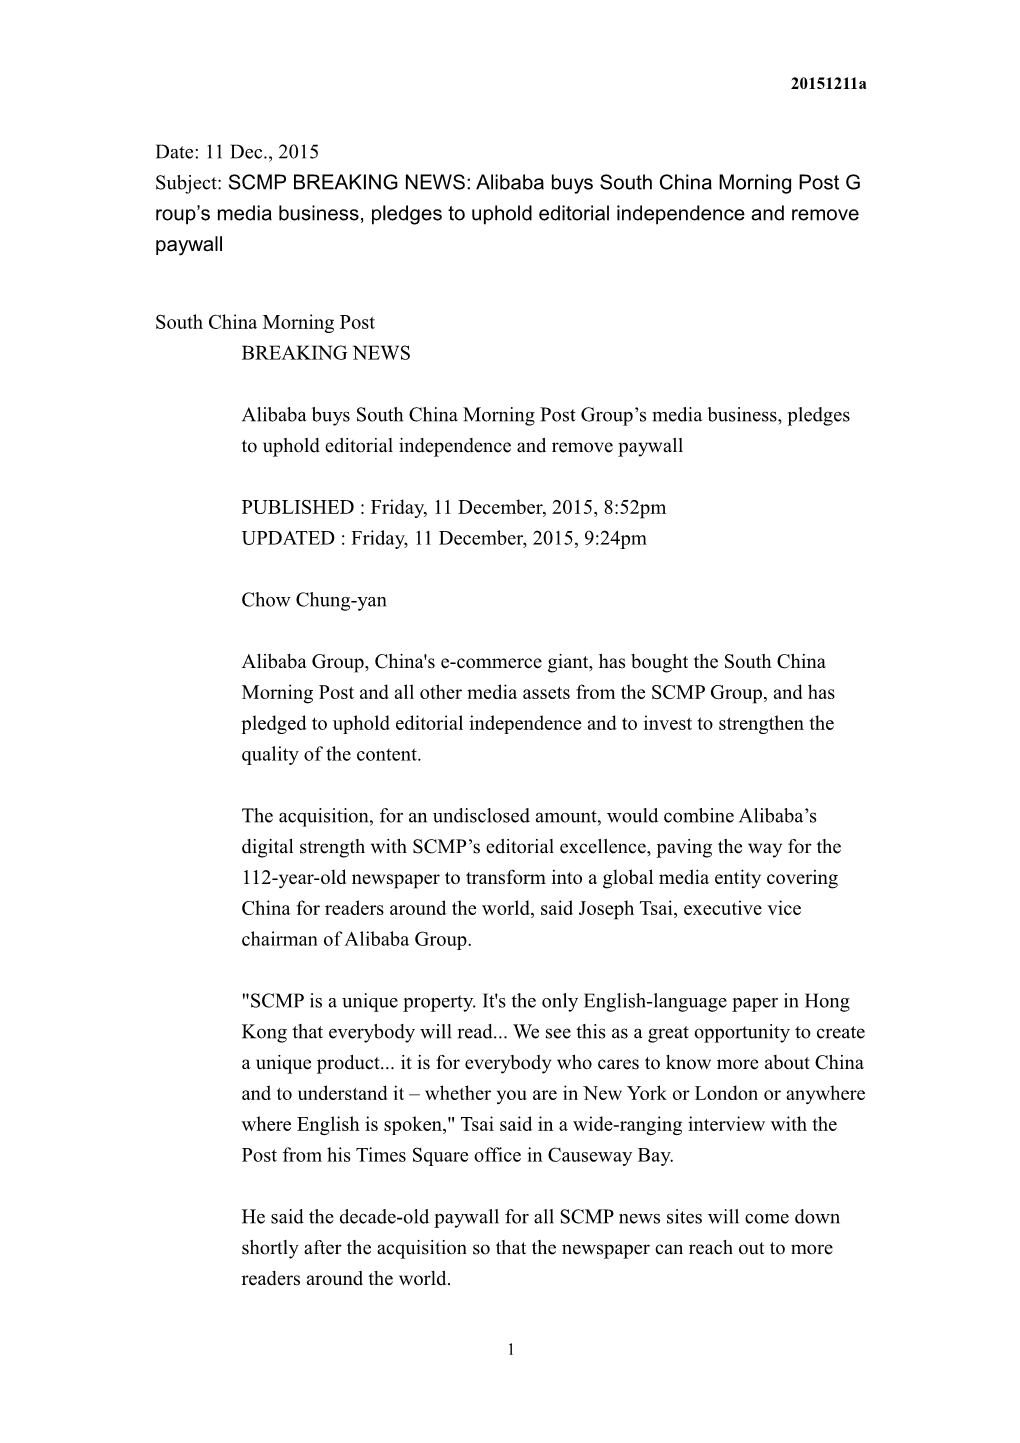 Subject:SCMP BREAKING NEWS: Alibaba Buys South China Morning Post Group S Media Business